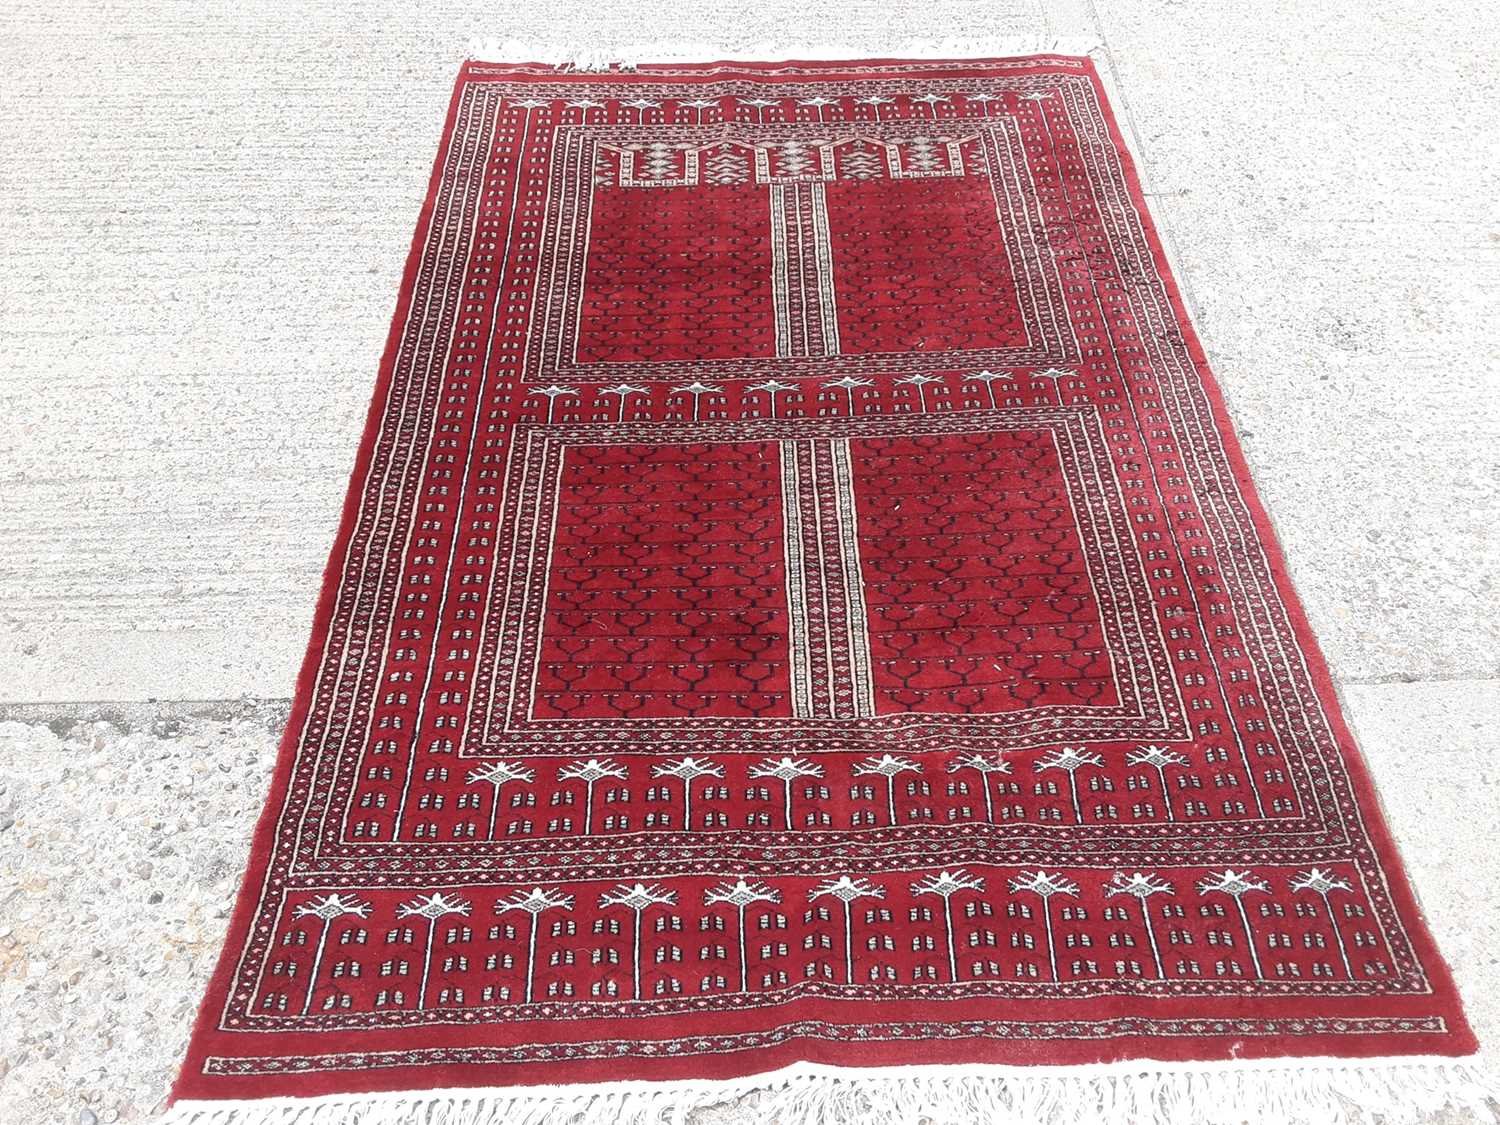 Lot 412 - Eastern rug with geometric decoration on red ground, 211cm x 140cm